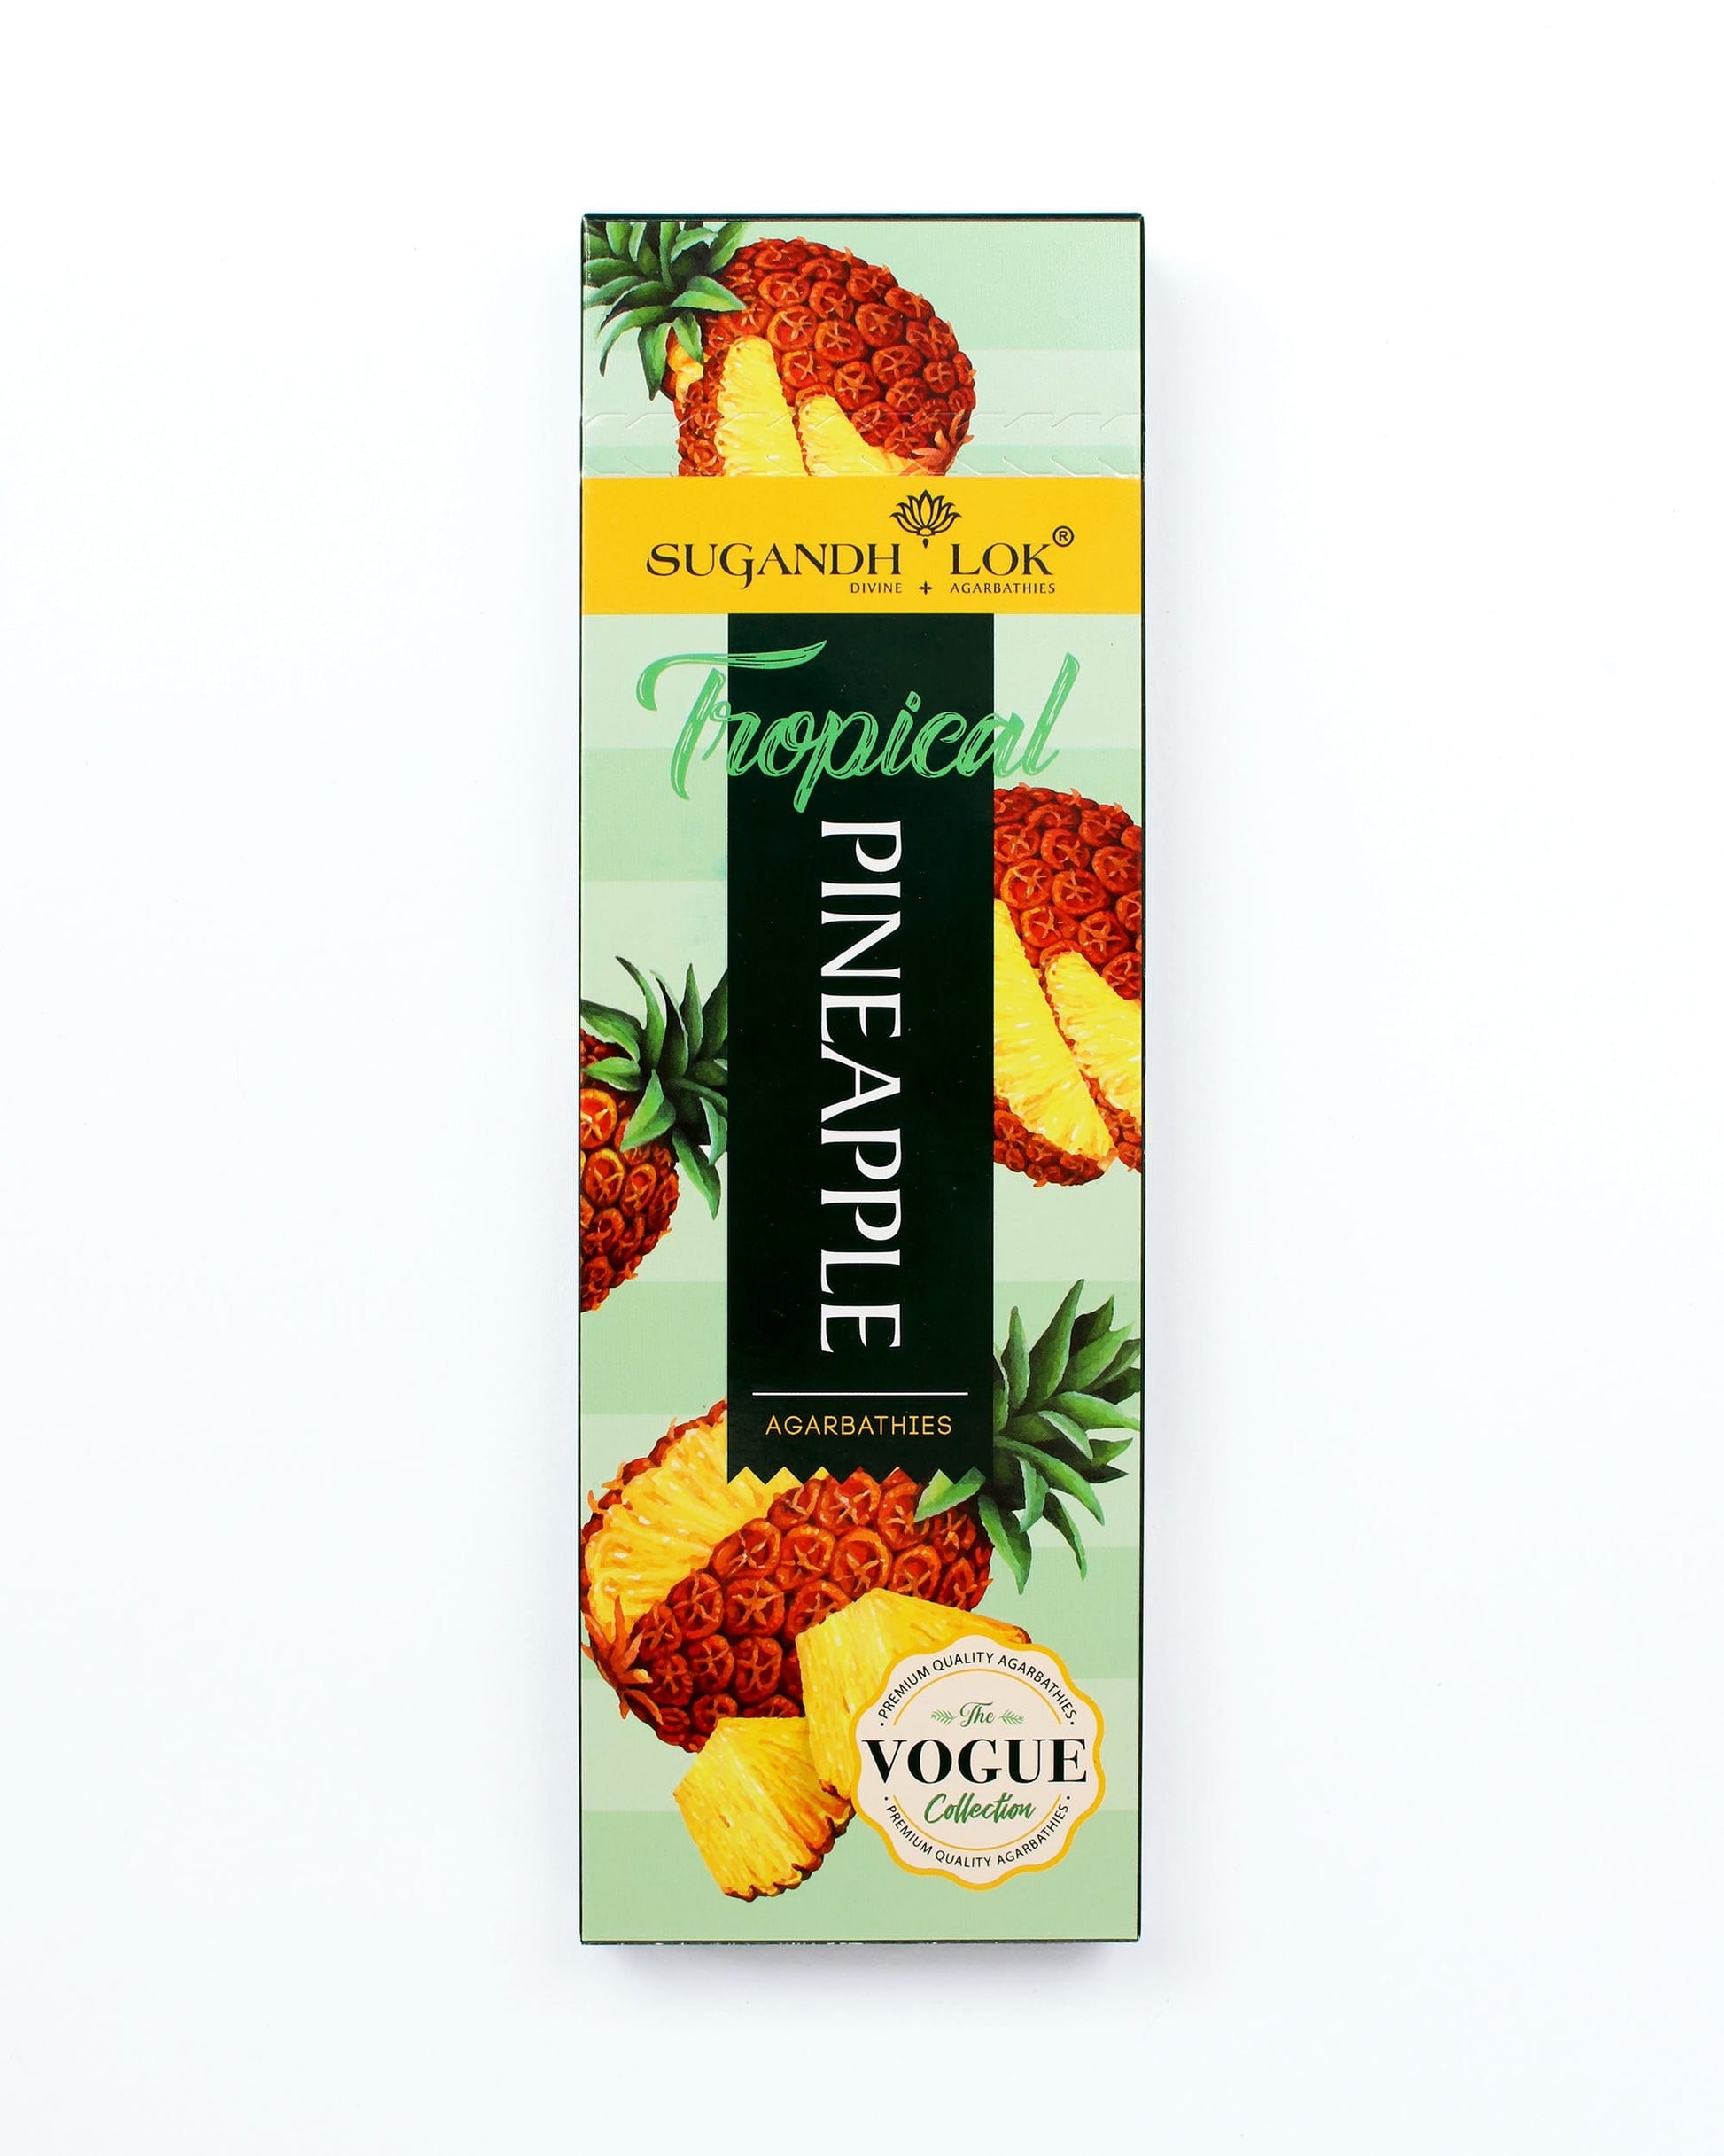 Tropical Pineapple Agarbatti Pack - Vogue Collection by SugandhLok